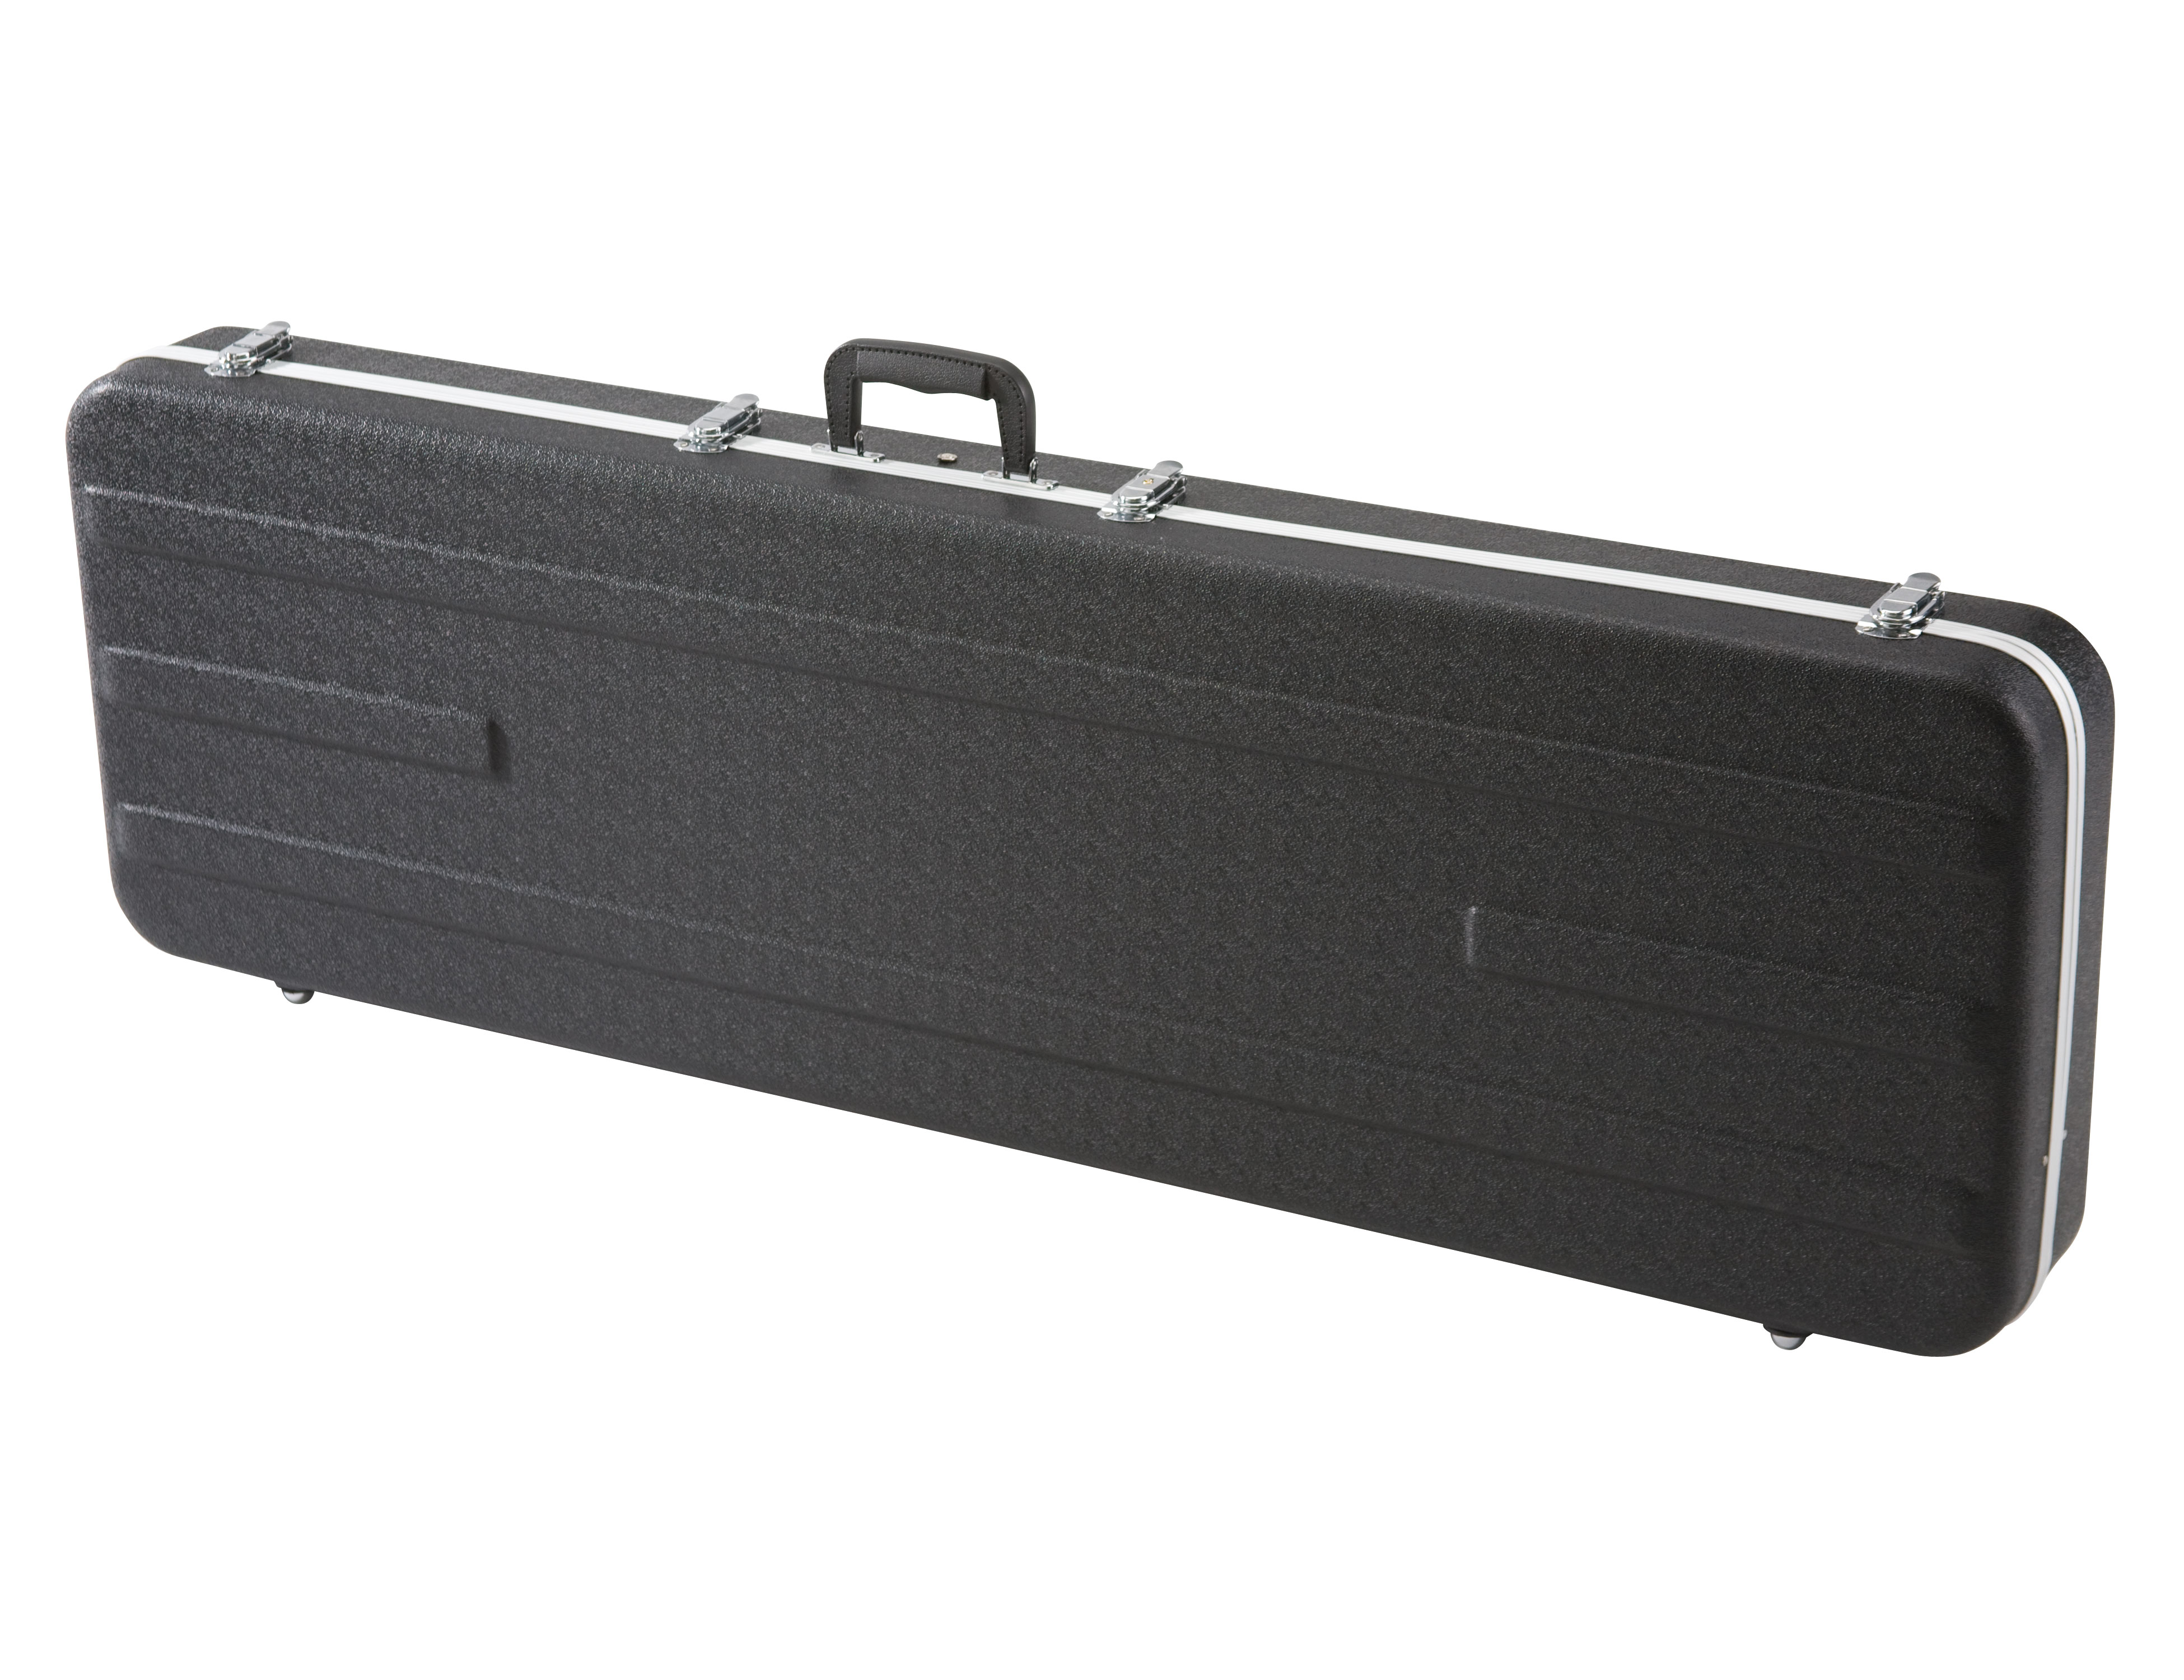 UPC 816627010151 product image for ARCHER ABS Molded Bass Guitar Case | upcitemdb.com